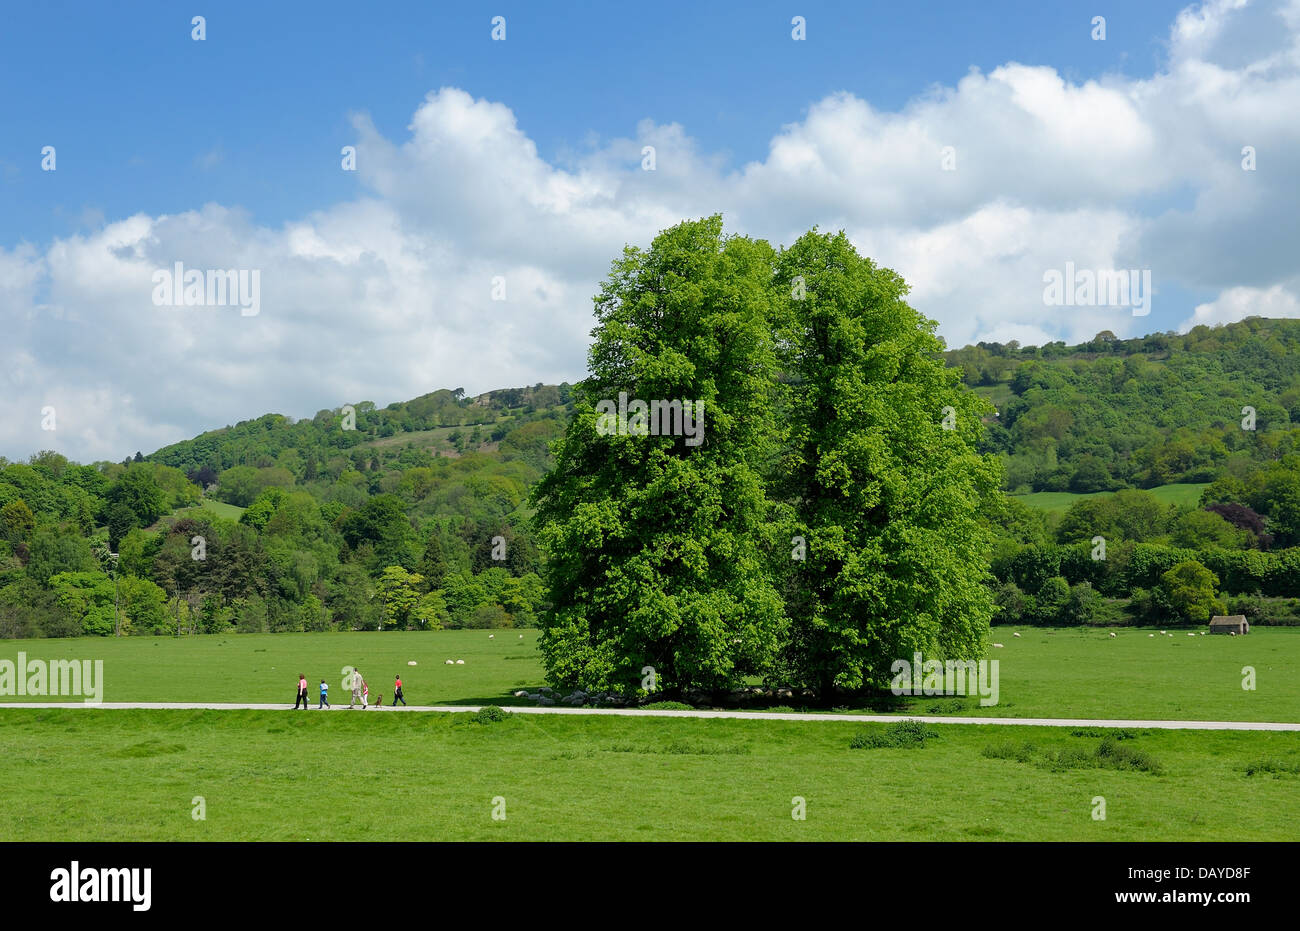 A family walking through the Derbyshire countryside England uk Stock Photo